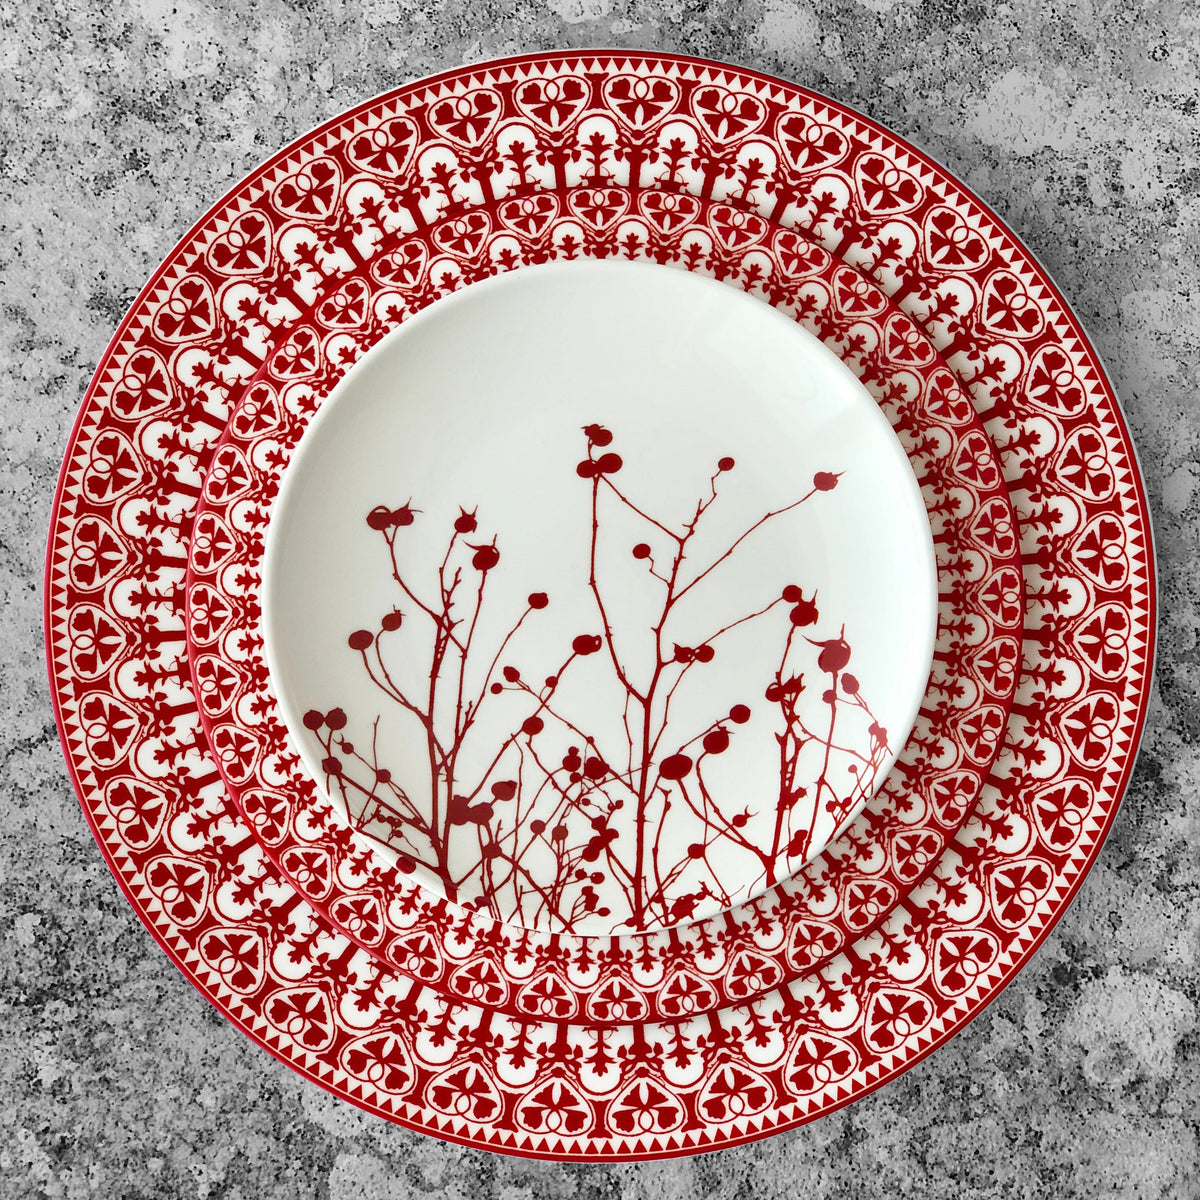 A Casablanca Crimson Rimmed Dinner Plate with festive-colored berries on it, inspired by Caskata Artisanal Home dinnerware.